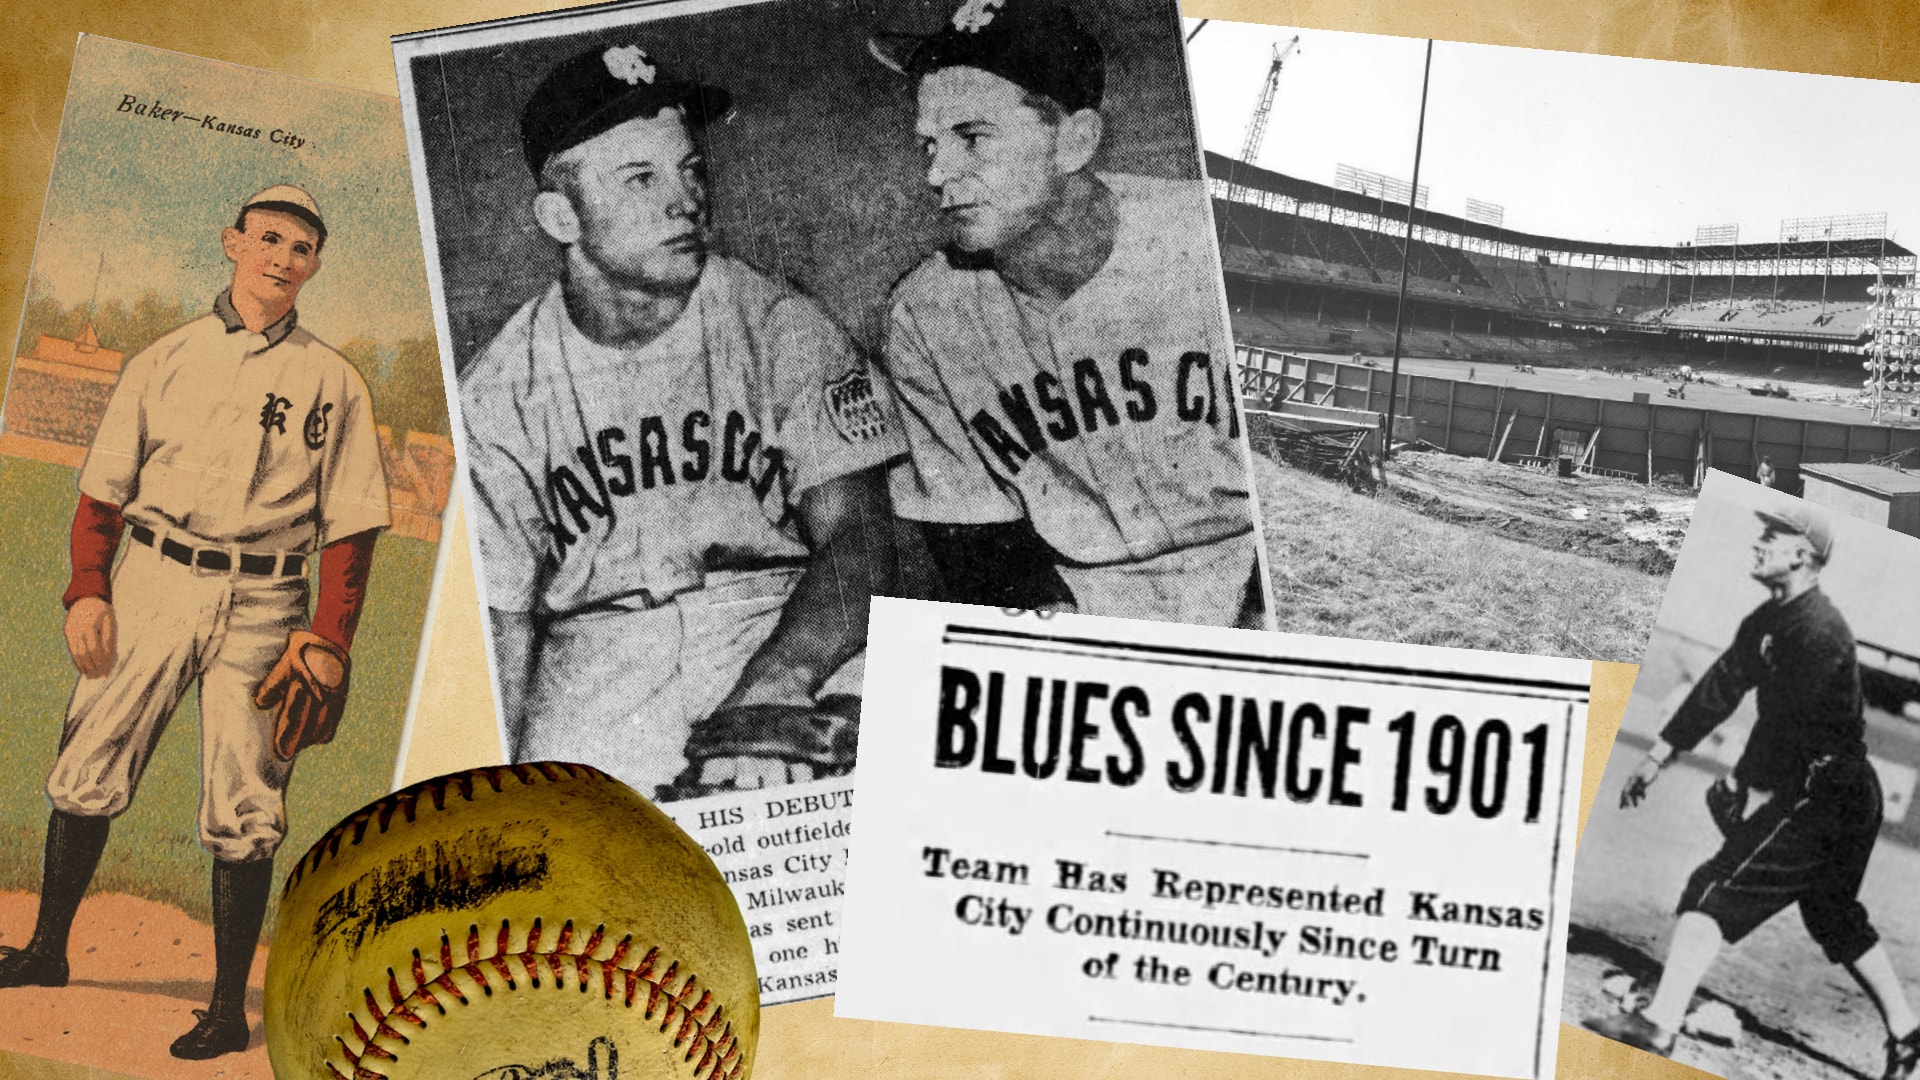 A collage featuring images of the Kansas City Blues baseball team members.